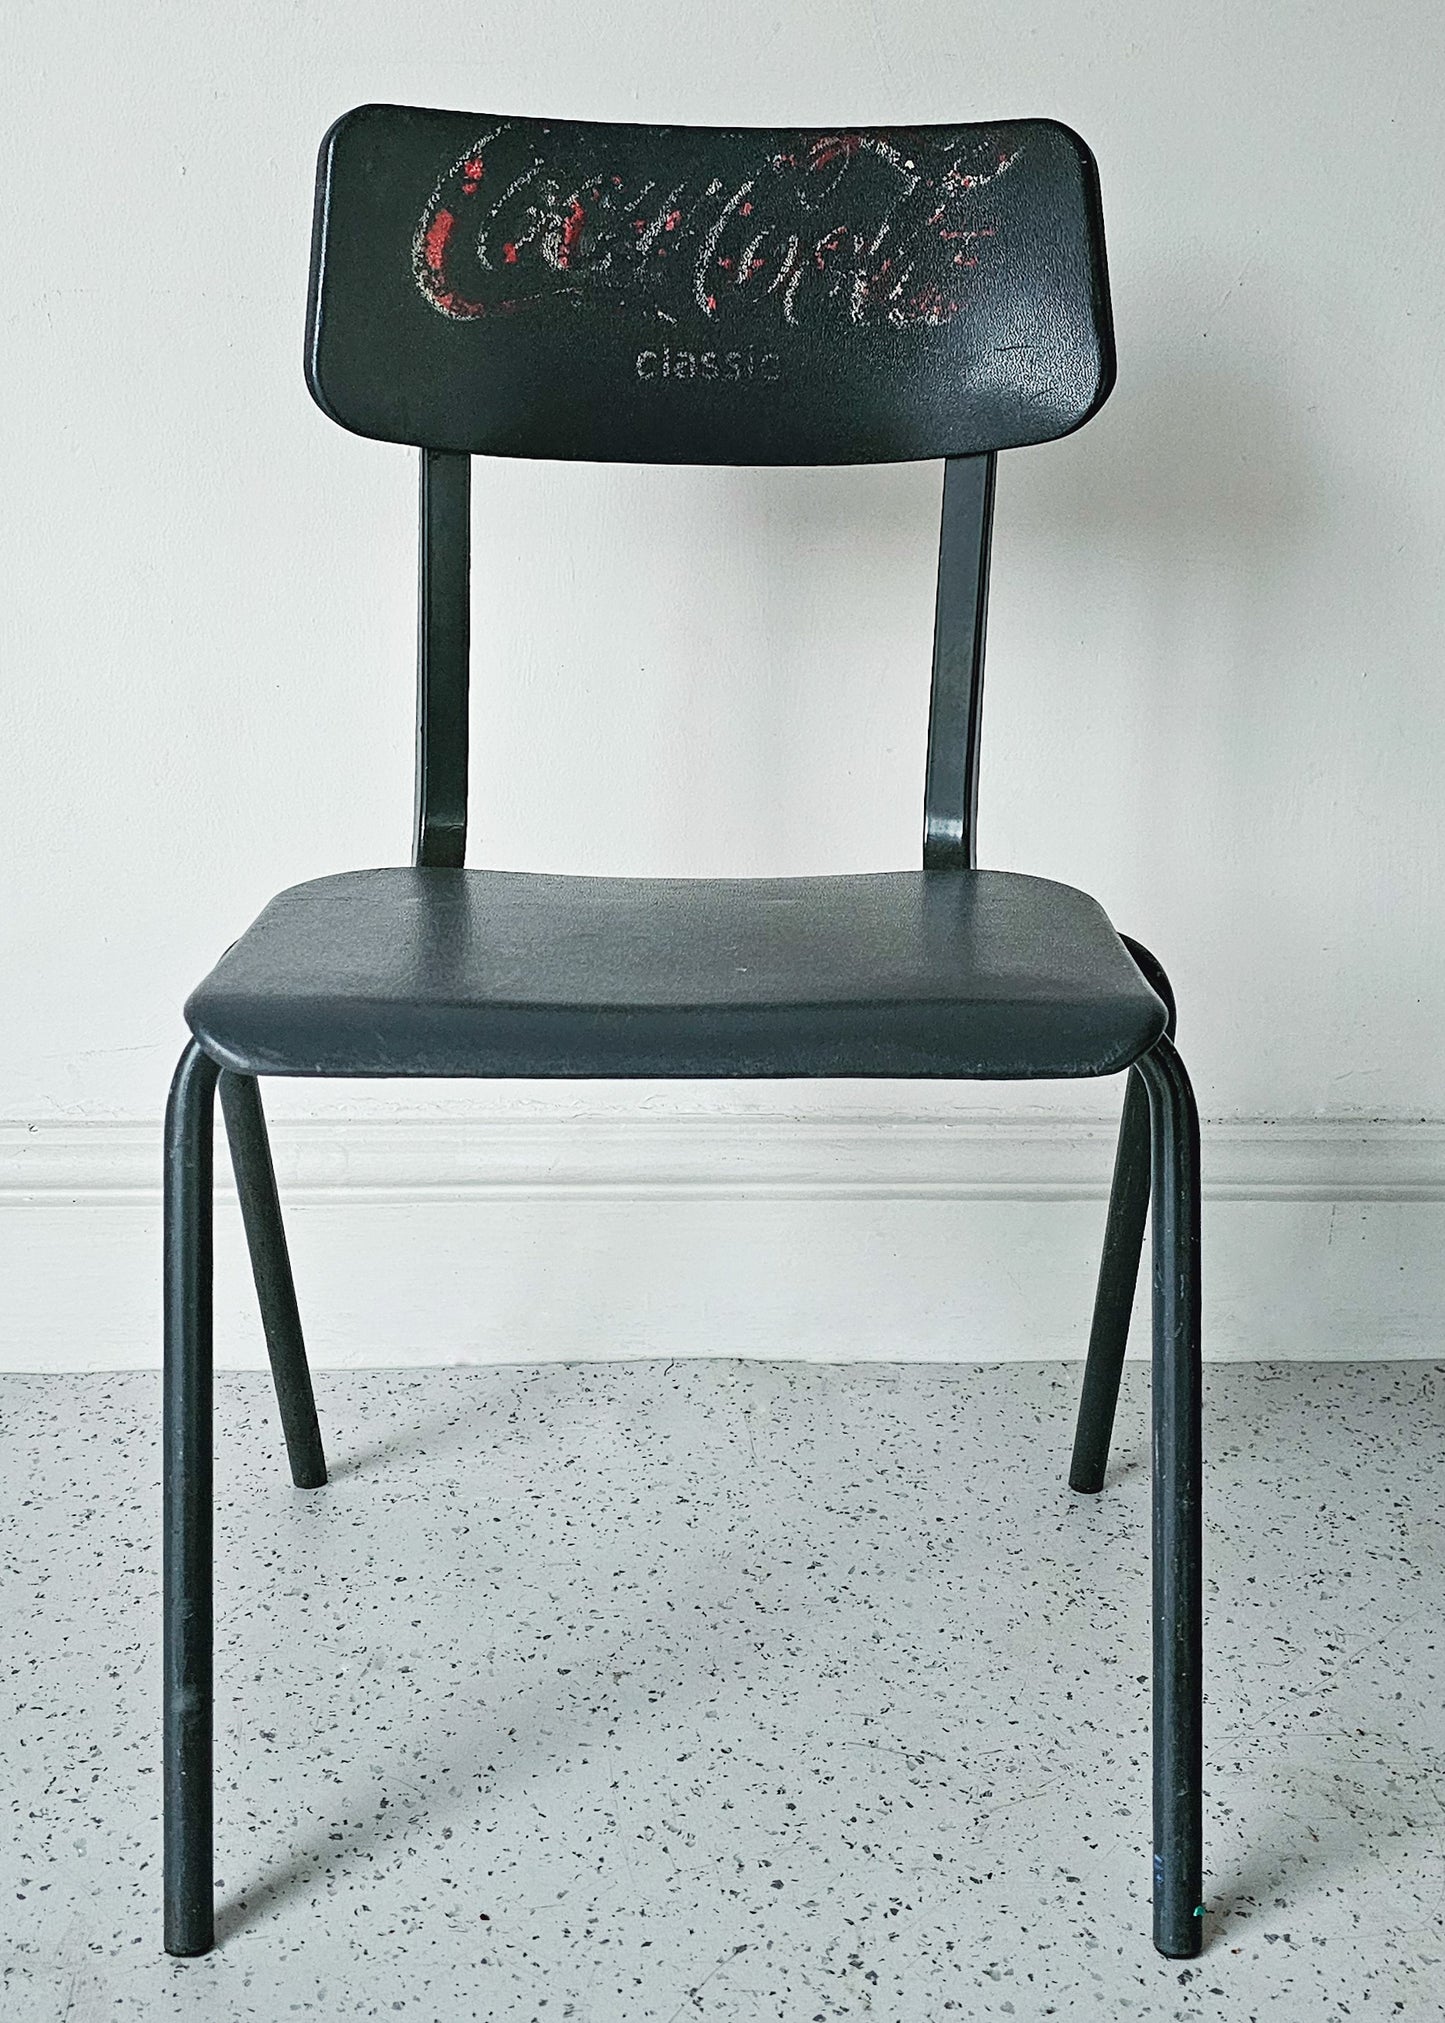 The Charlie Vintage Coca Cola Industrial Chair